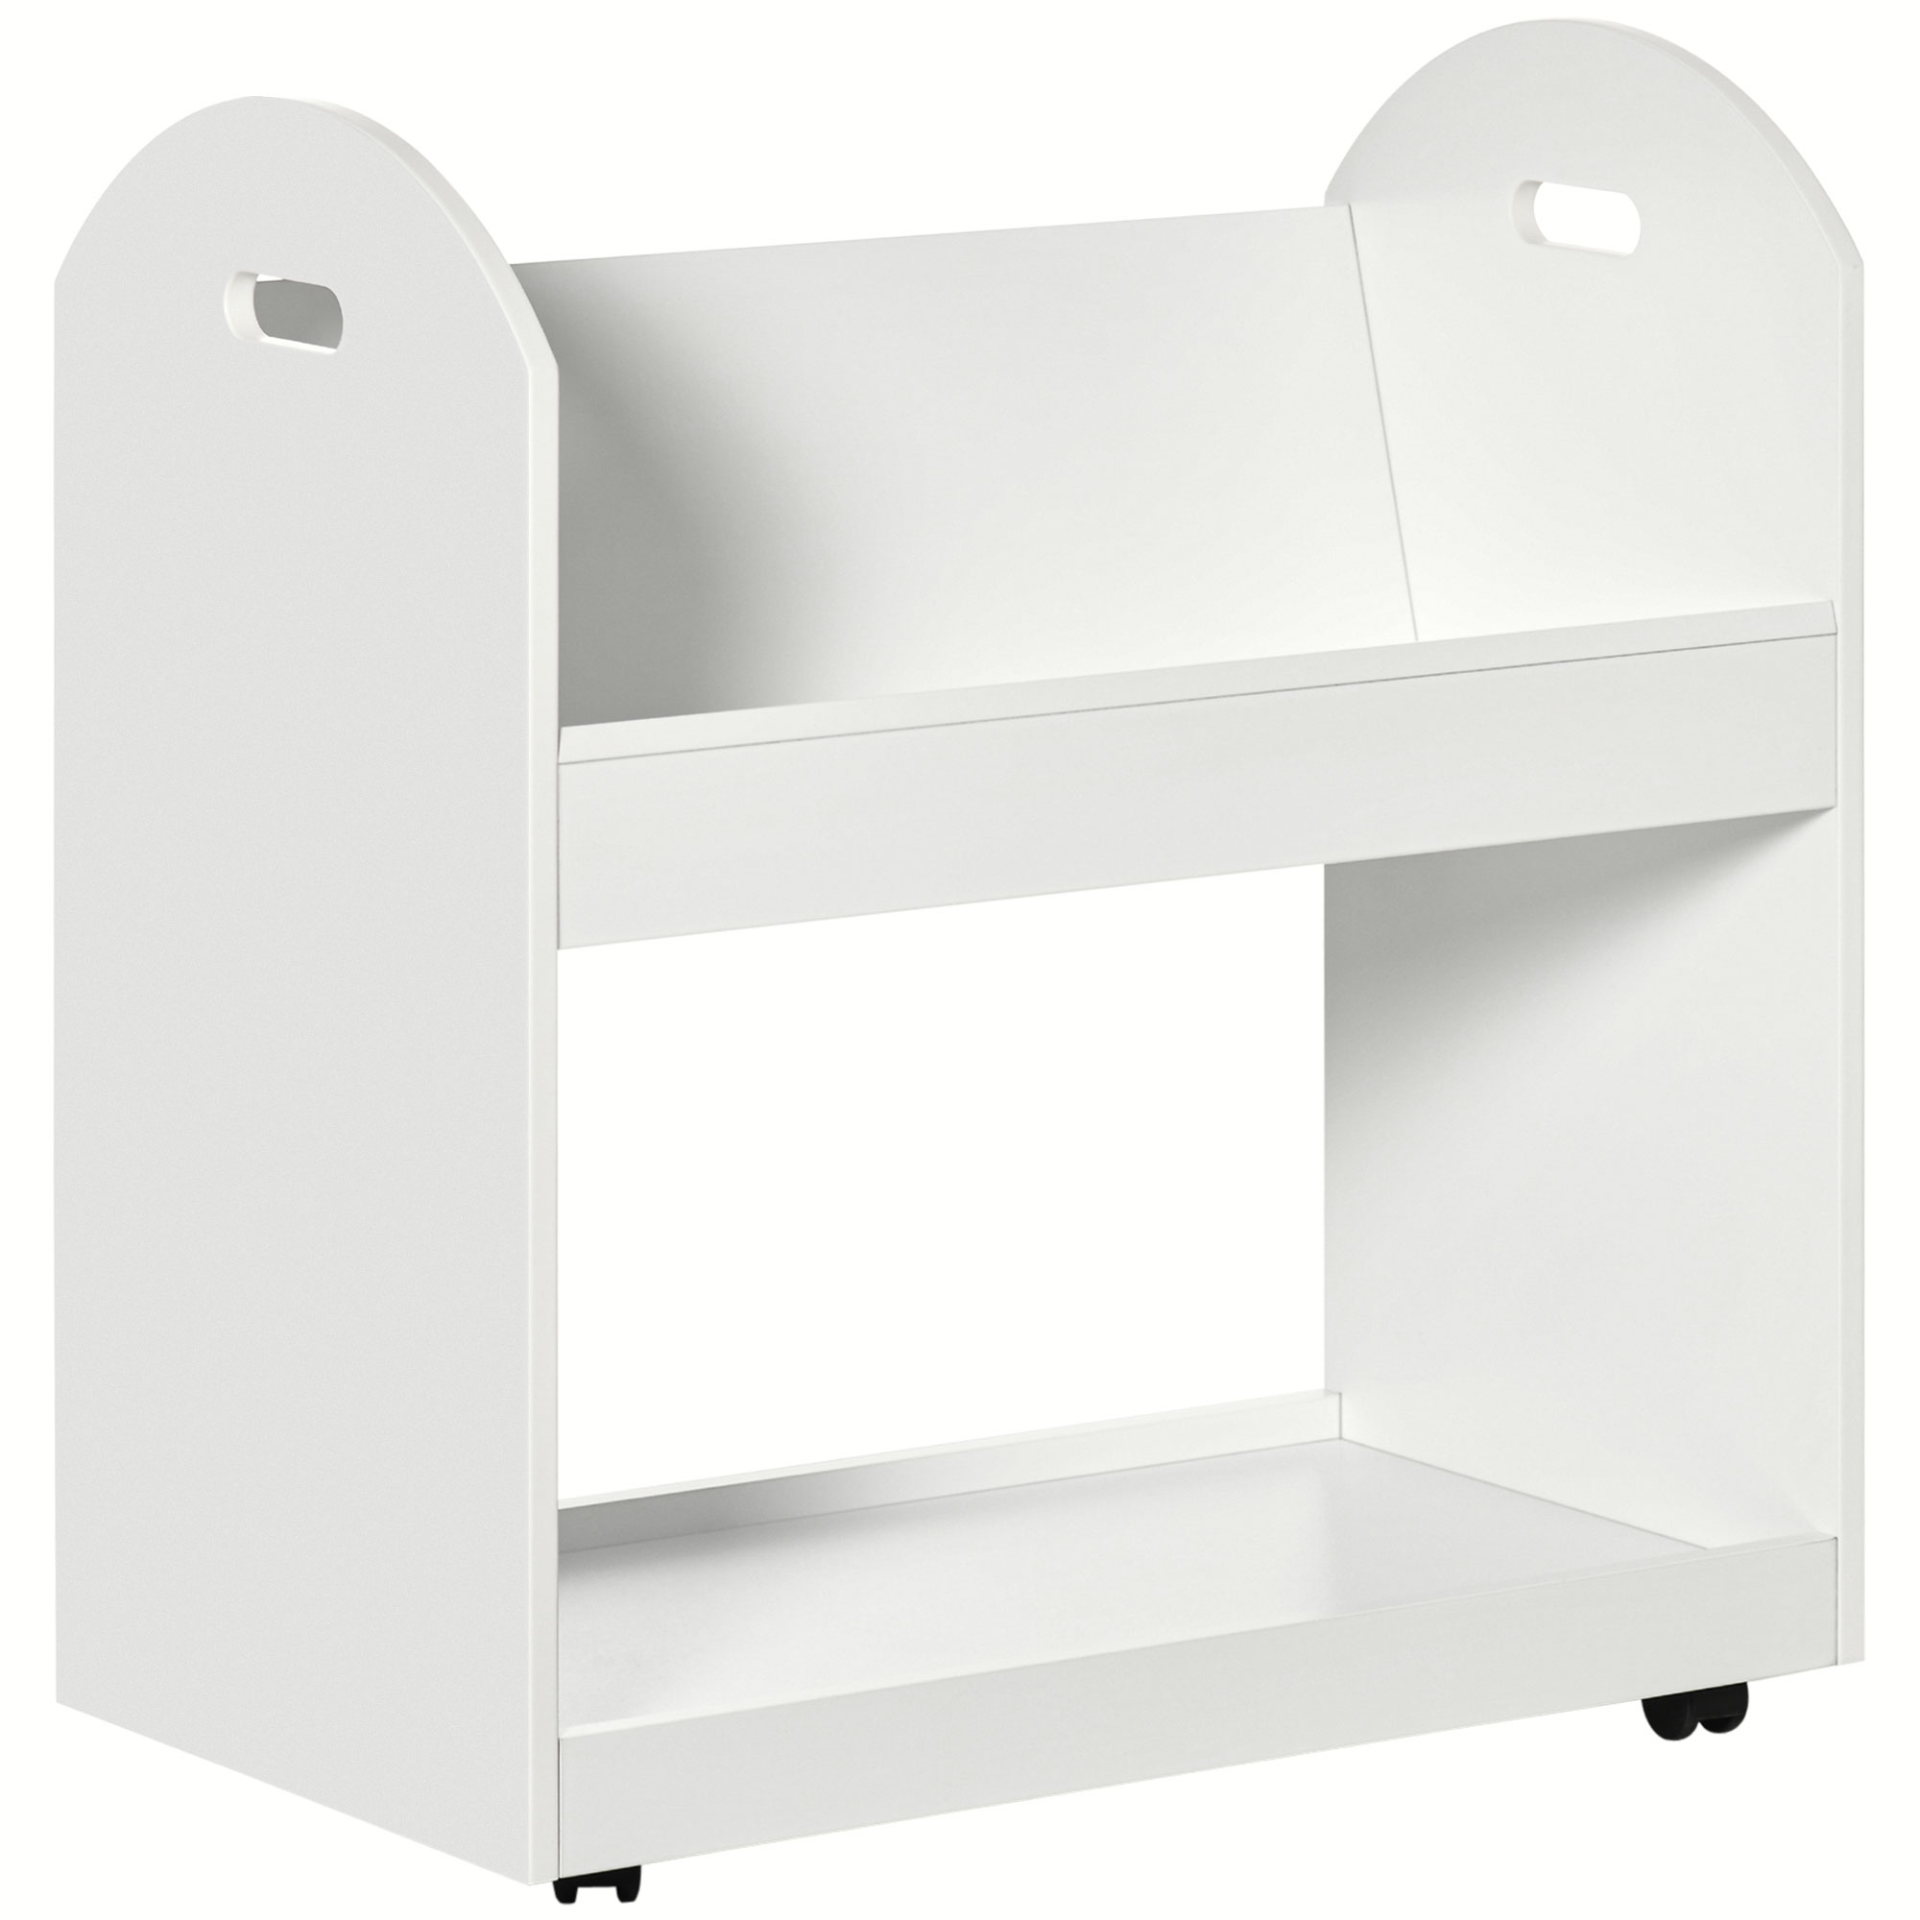 HOMCOM 2-Tier Storage Shelves, Kitchen Cart Shelf Unit with Wheels for Dining & Living Room, Home Study, White